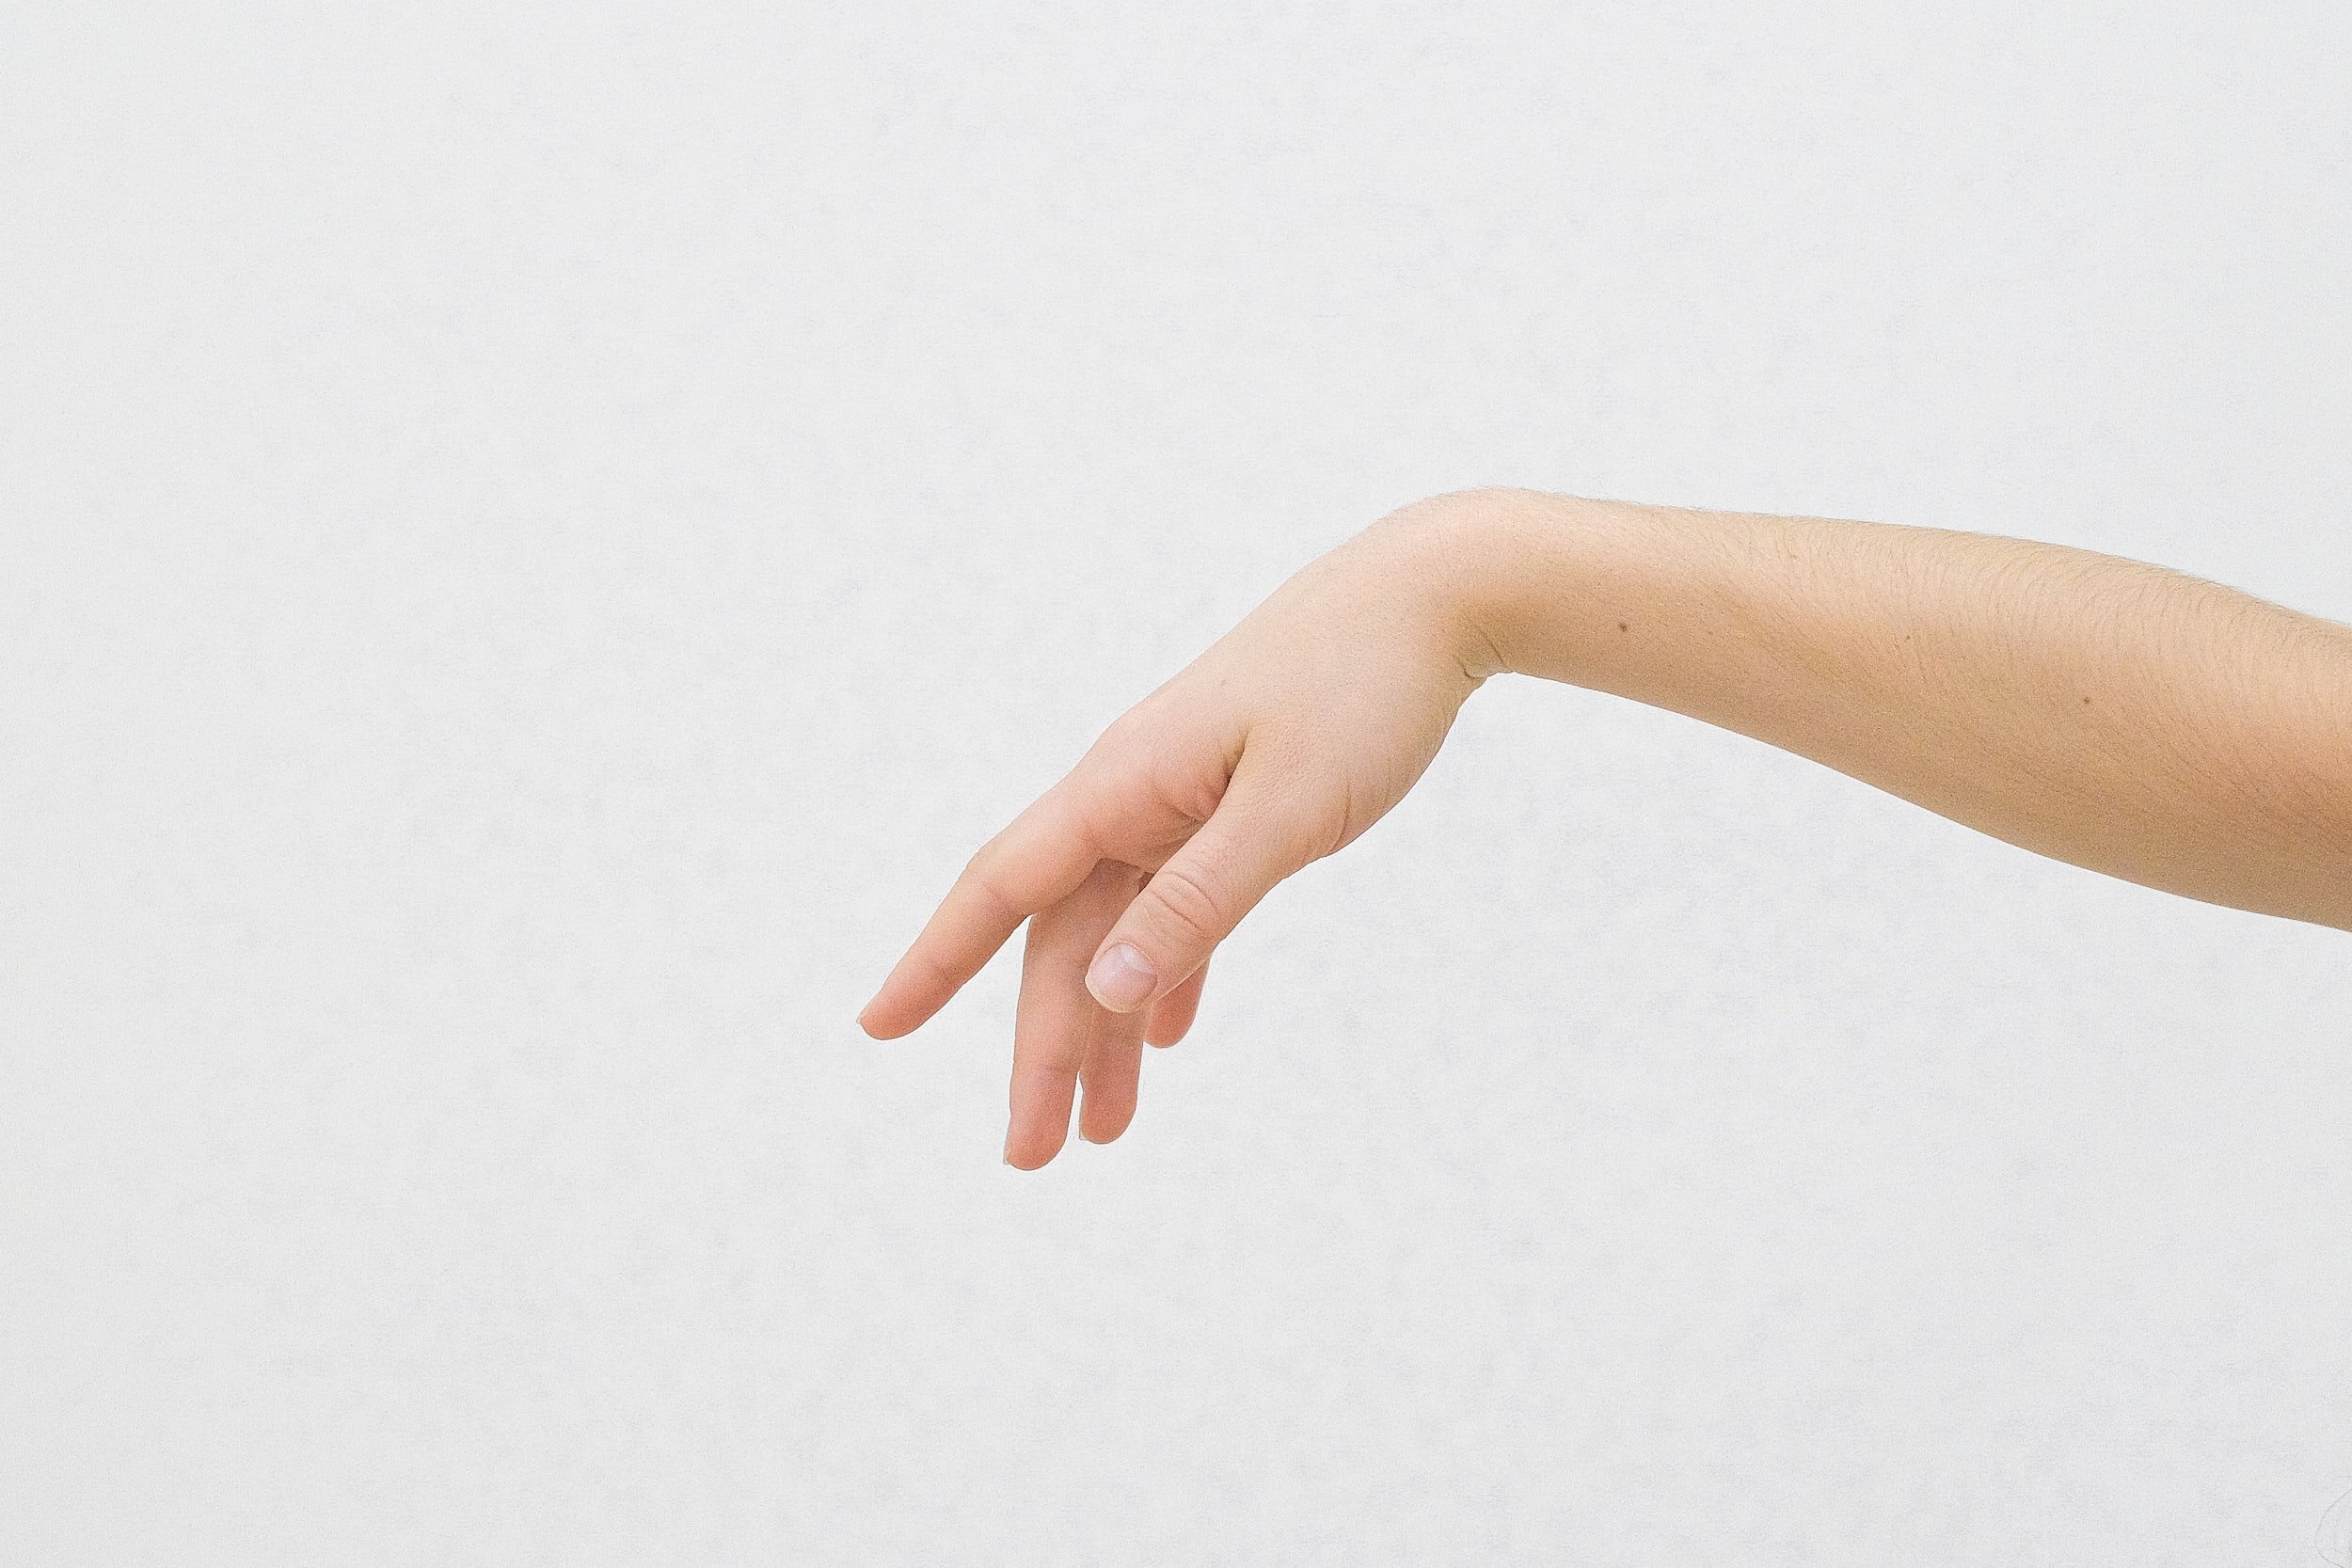 Do You Know What Causes Finger Numbness & Tingling?